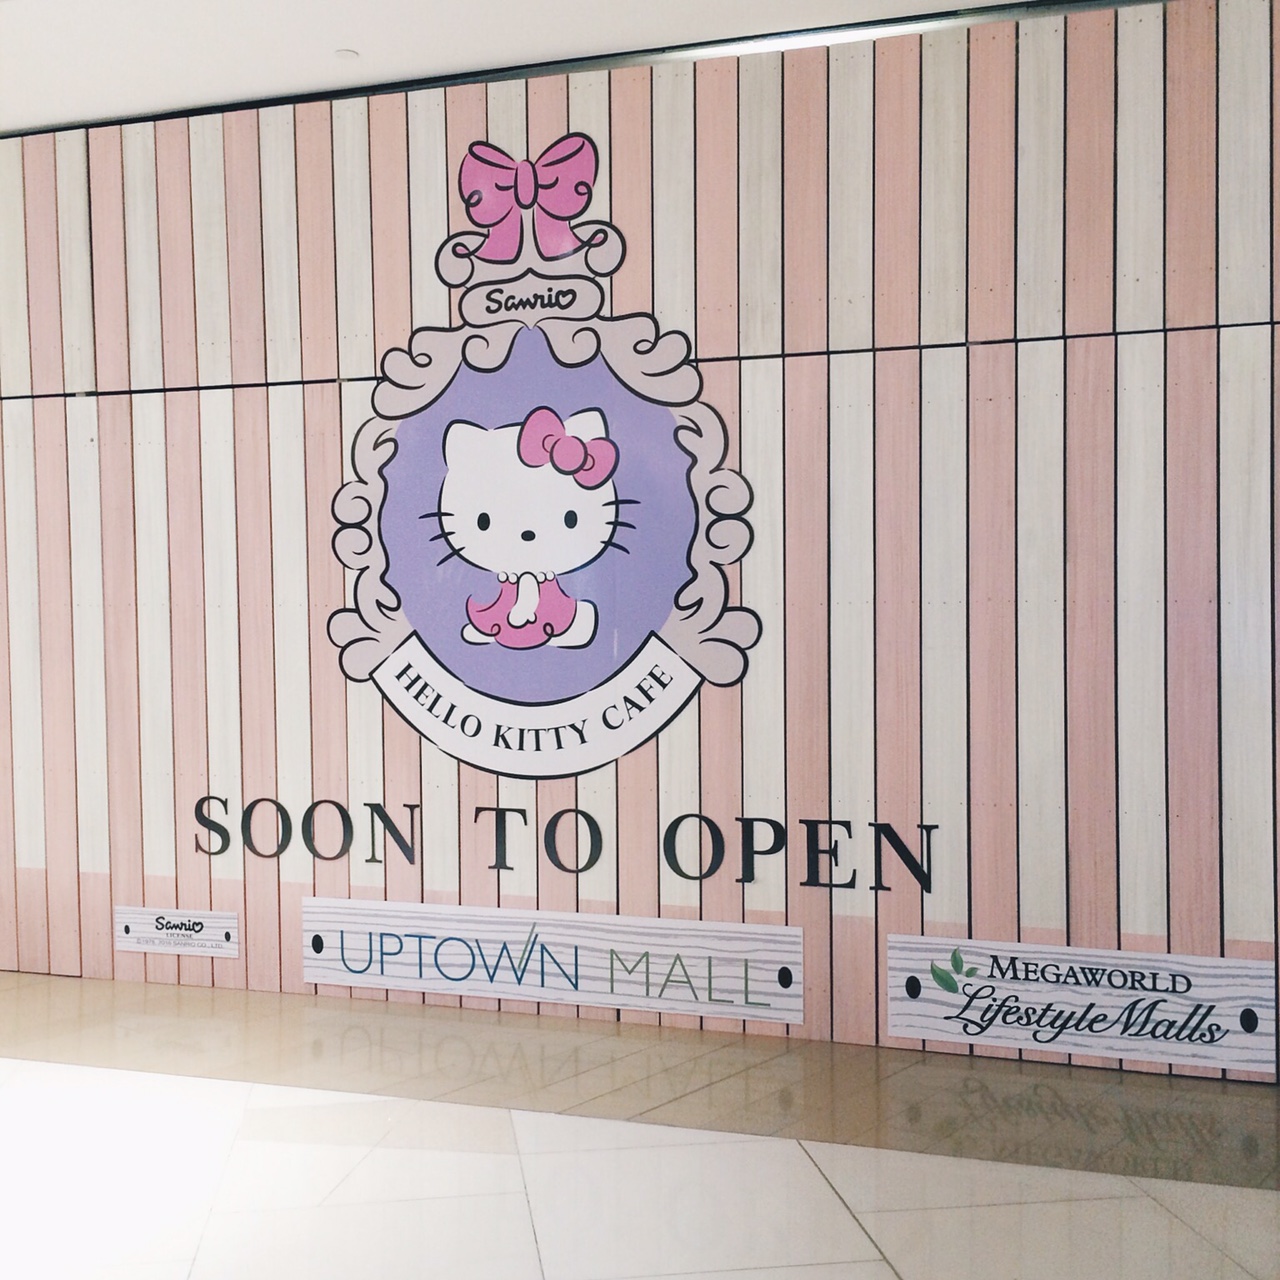 A Hello Kitty Cafe Is Opening In Las Vegas & The Menu Is Too Cute